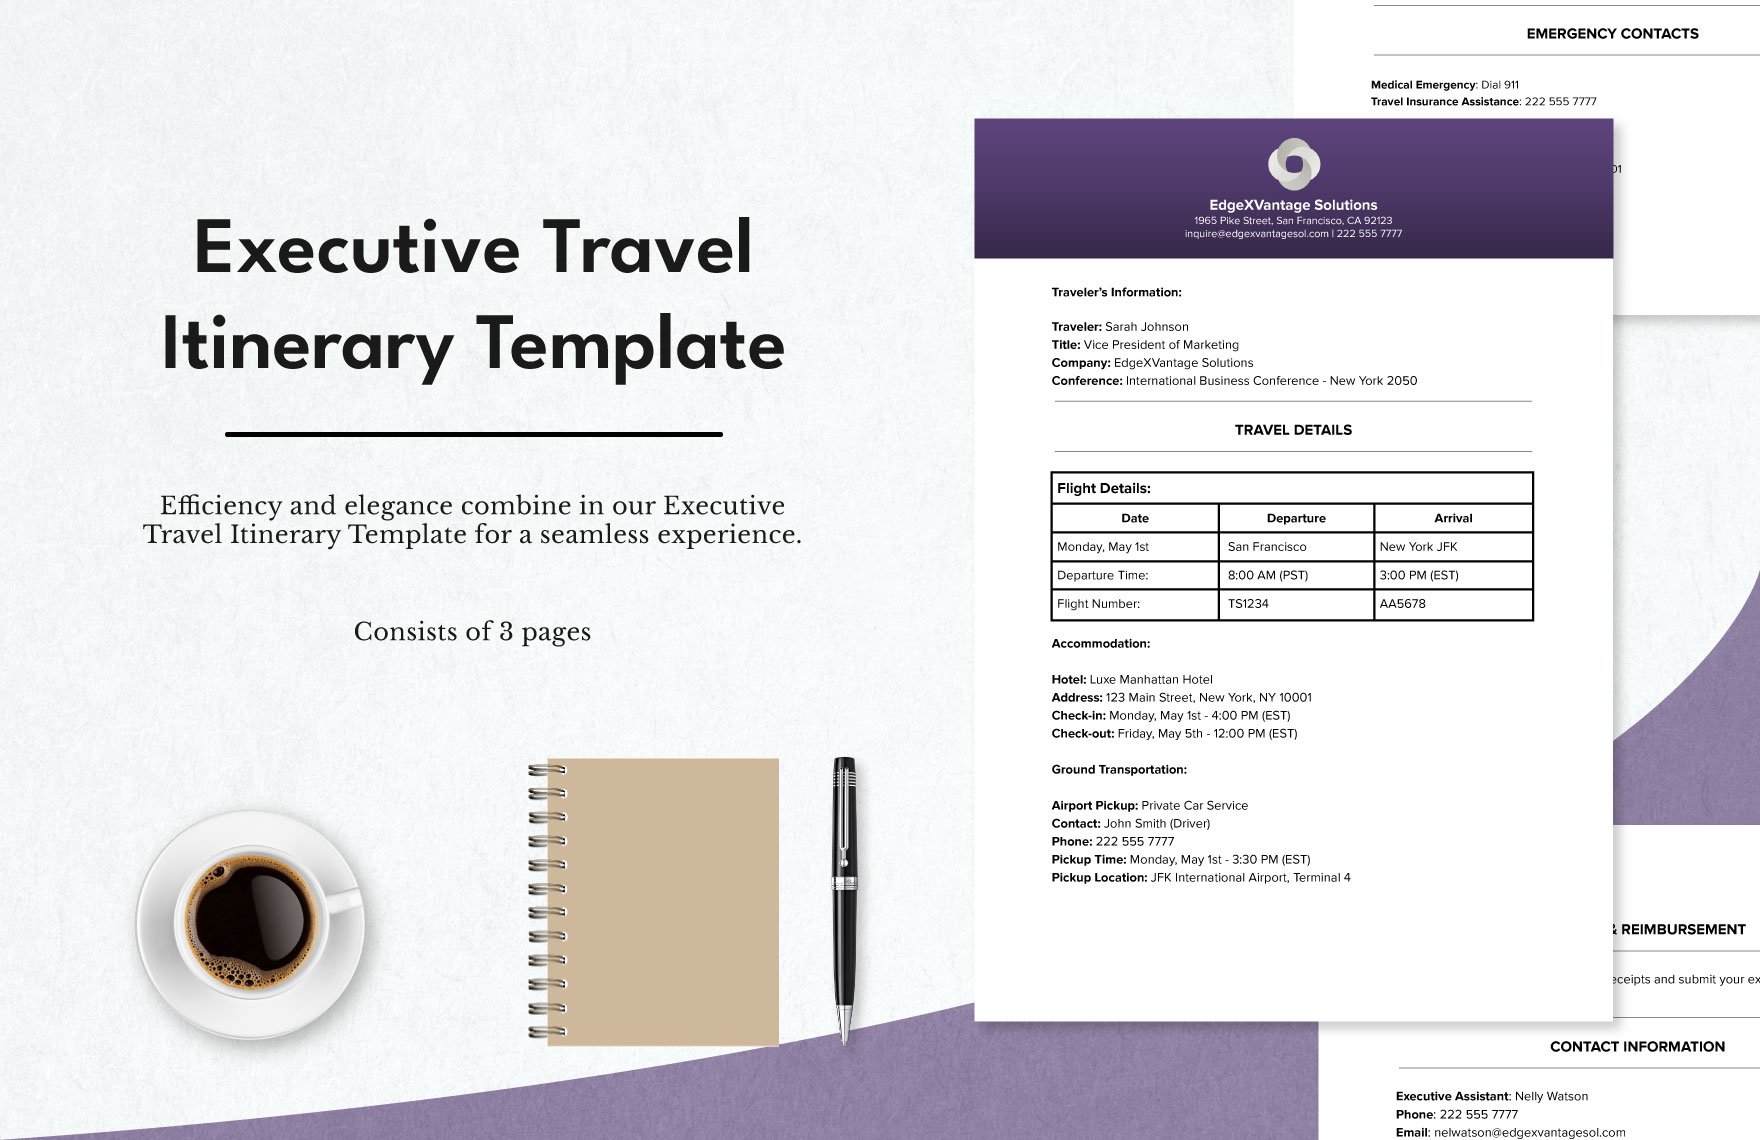 Executive Travel Itinerary Template